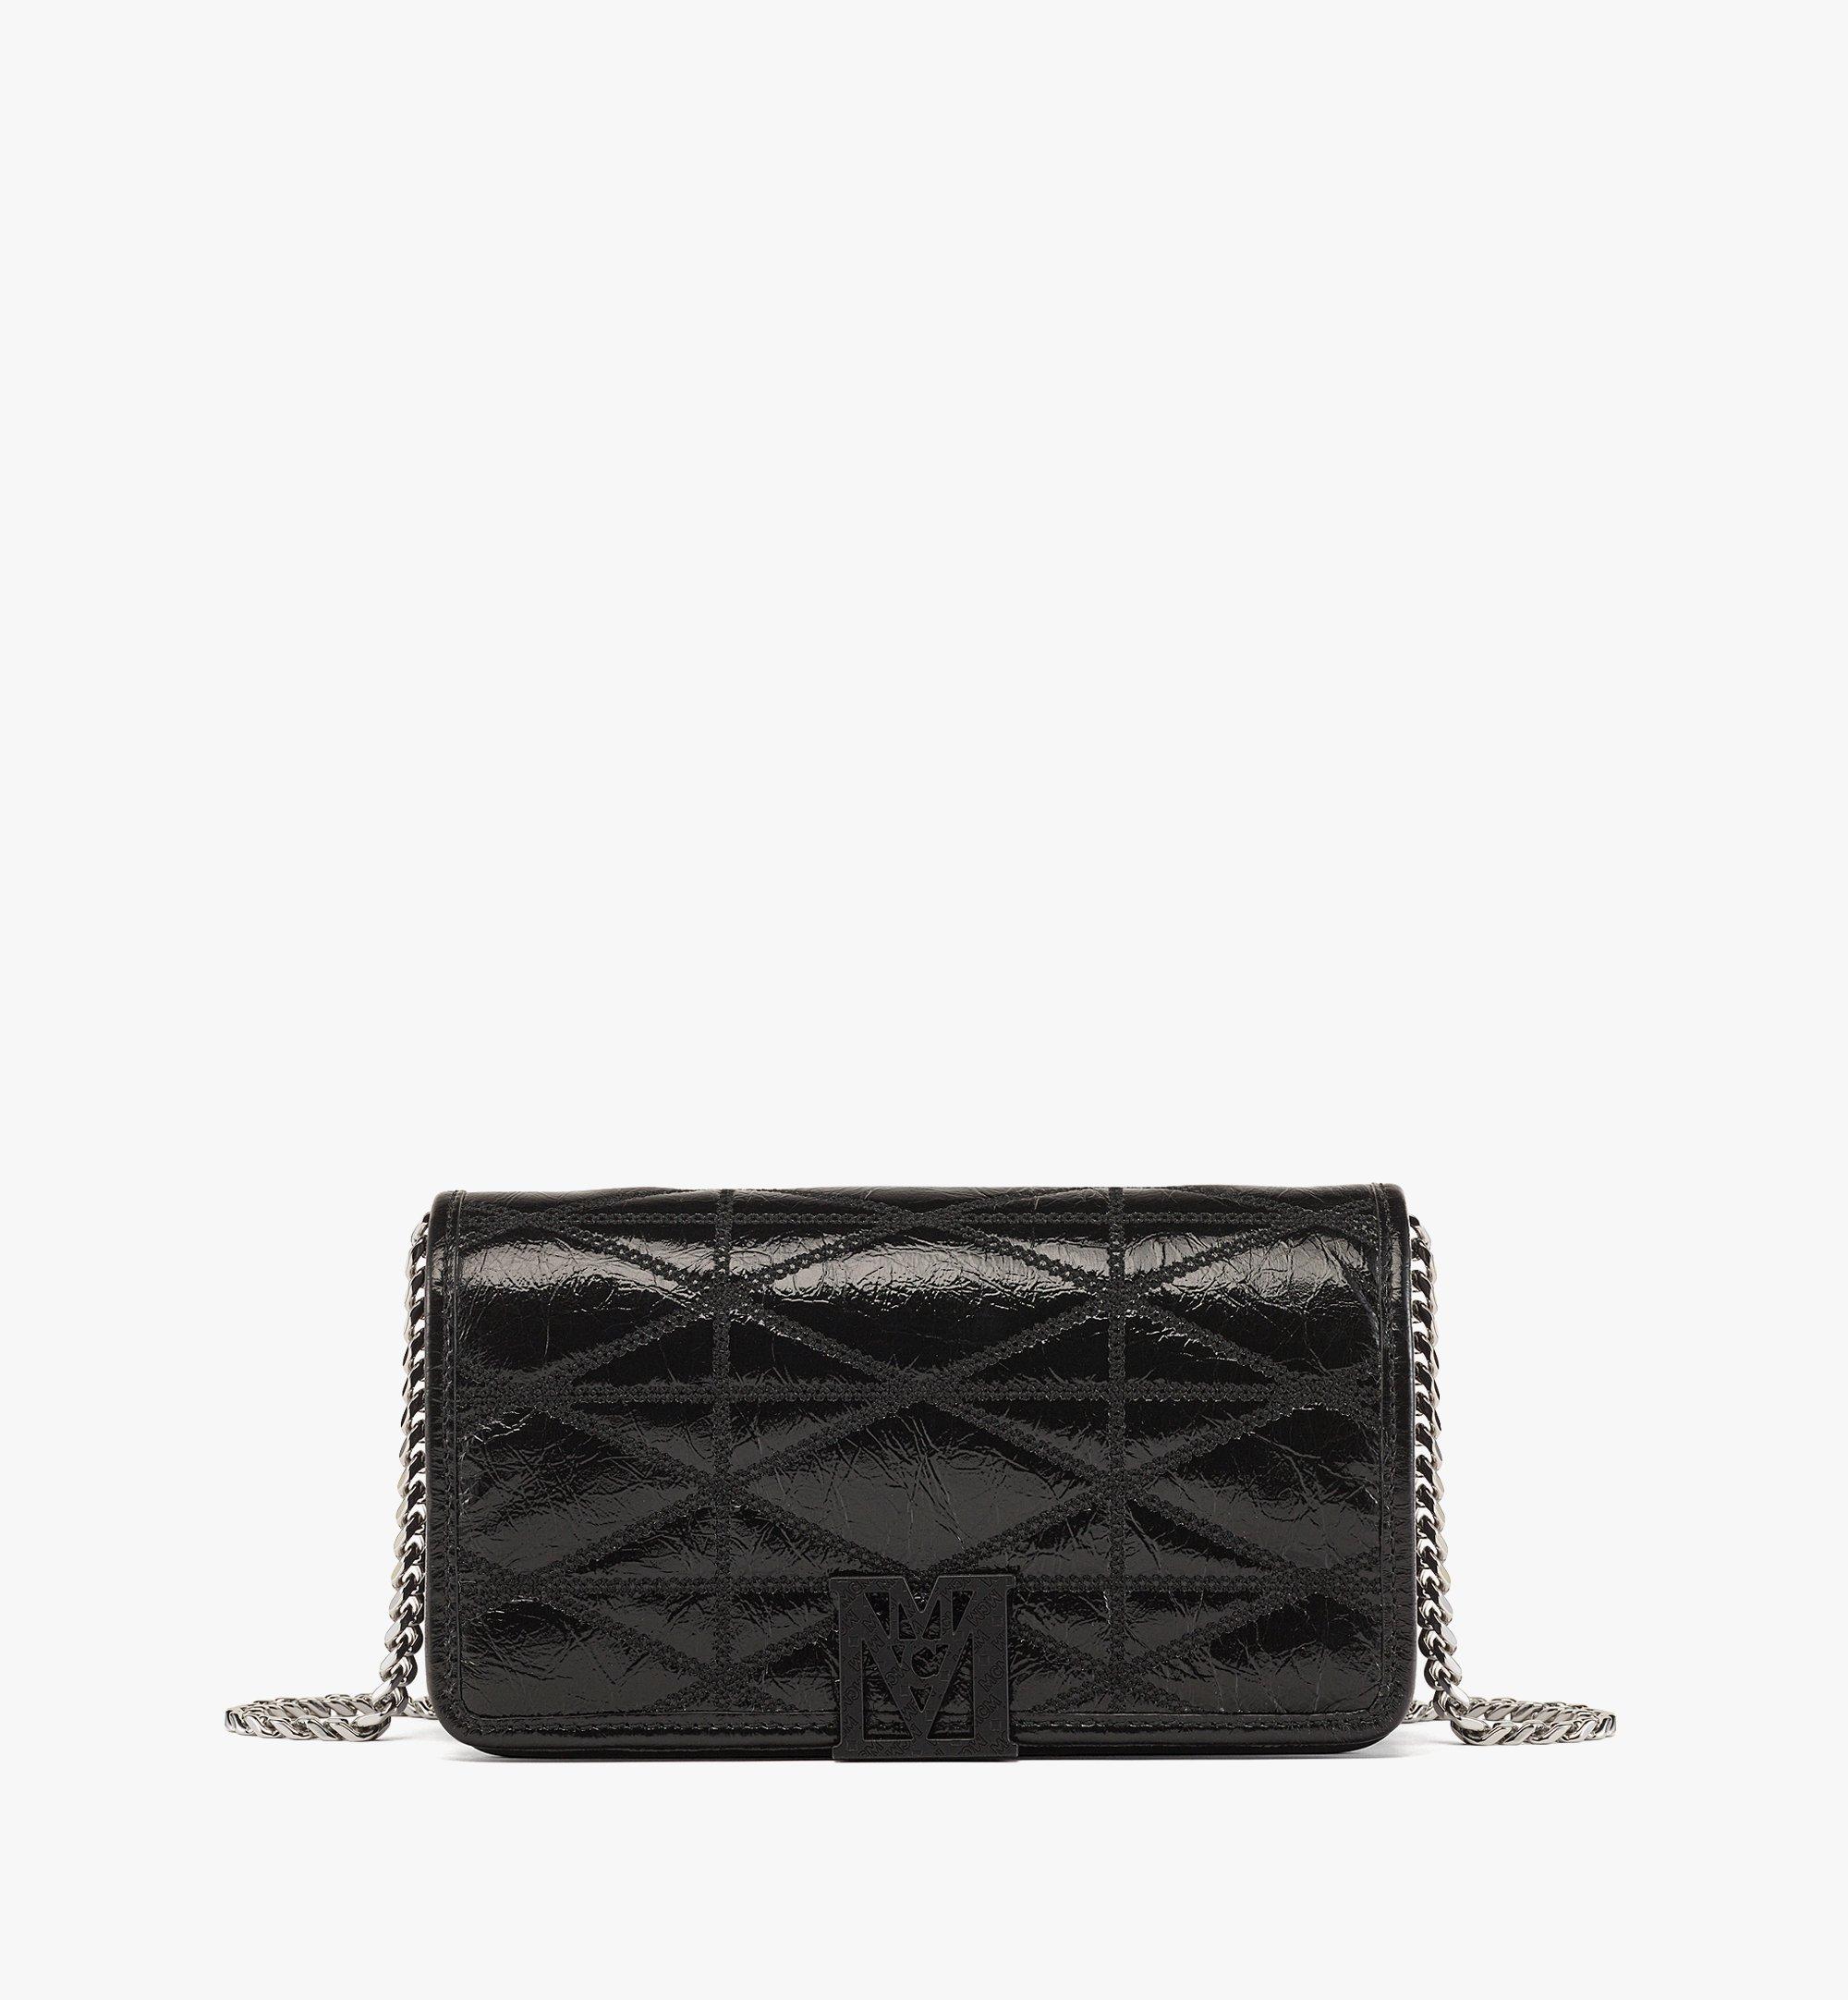 MCM Travia Quilted Chain Wallet in Crushed Leather Black MYLDALM01BK001 Alternate View 1